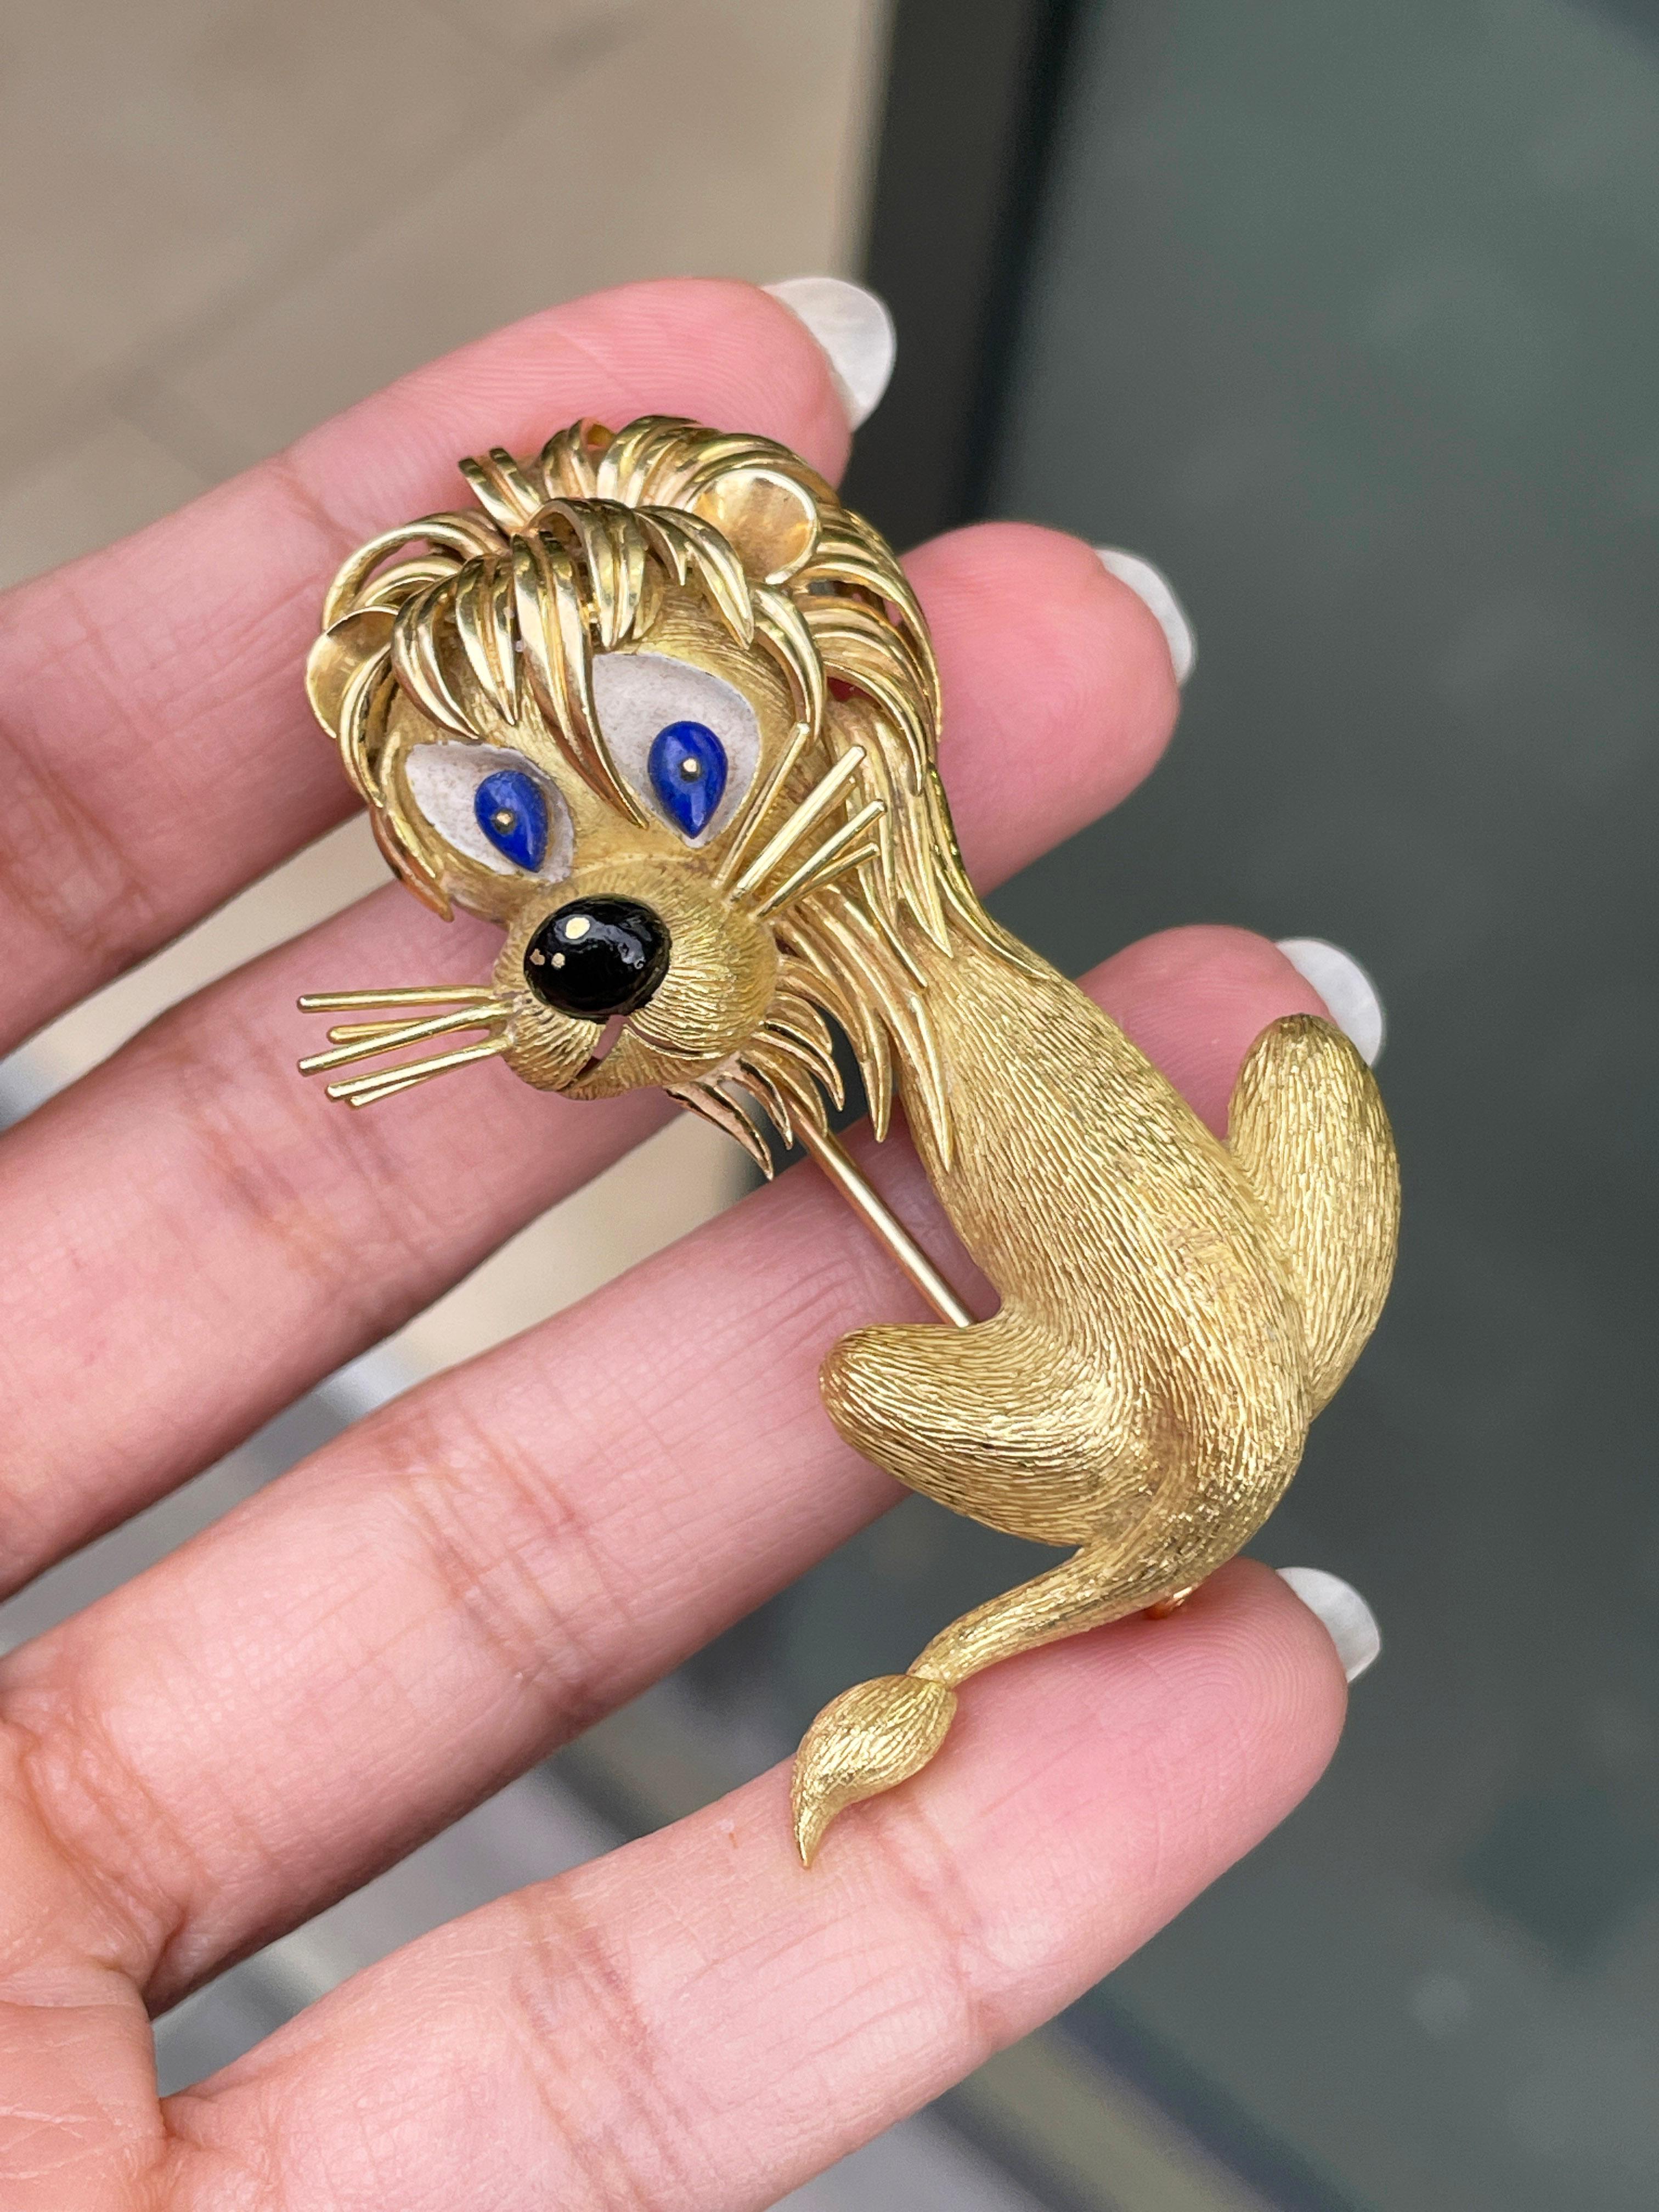 This magnificent vintage brooch by Cartier features a perfectly structured cartoony lion design masterfully crafted from solid 18 carat yellow gold.
The lion's eyes are accented with 2 pear shaped cabochon lapis lazuli and black enamelling has been